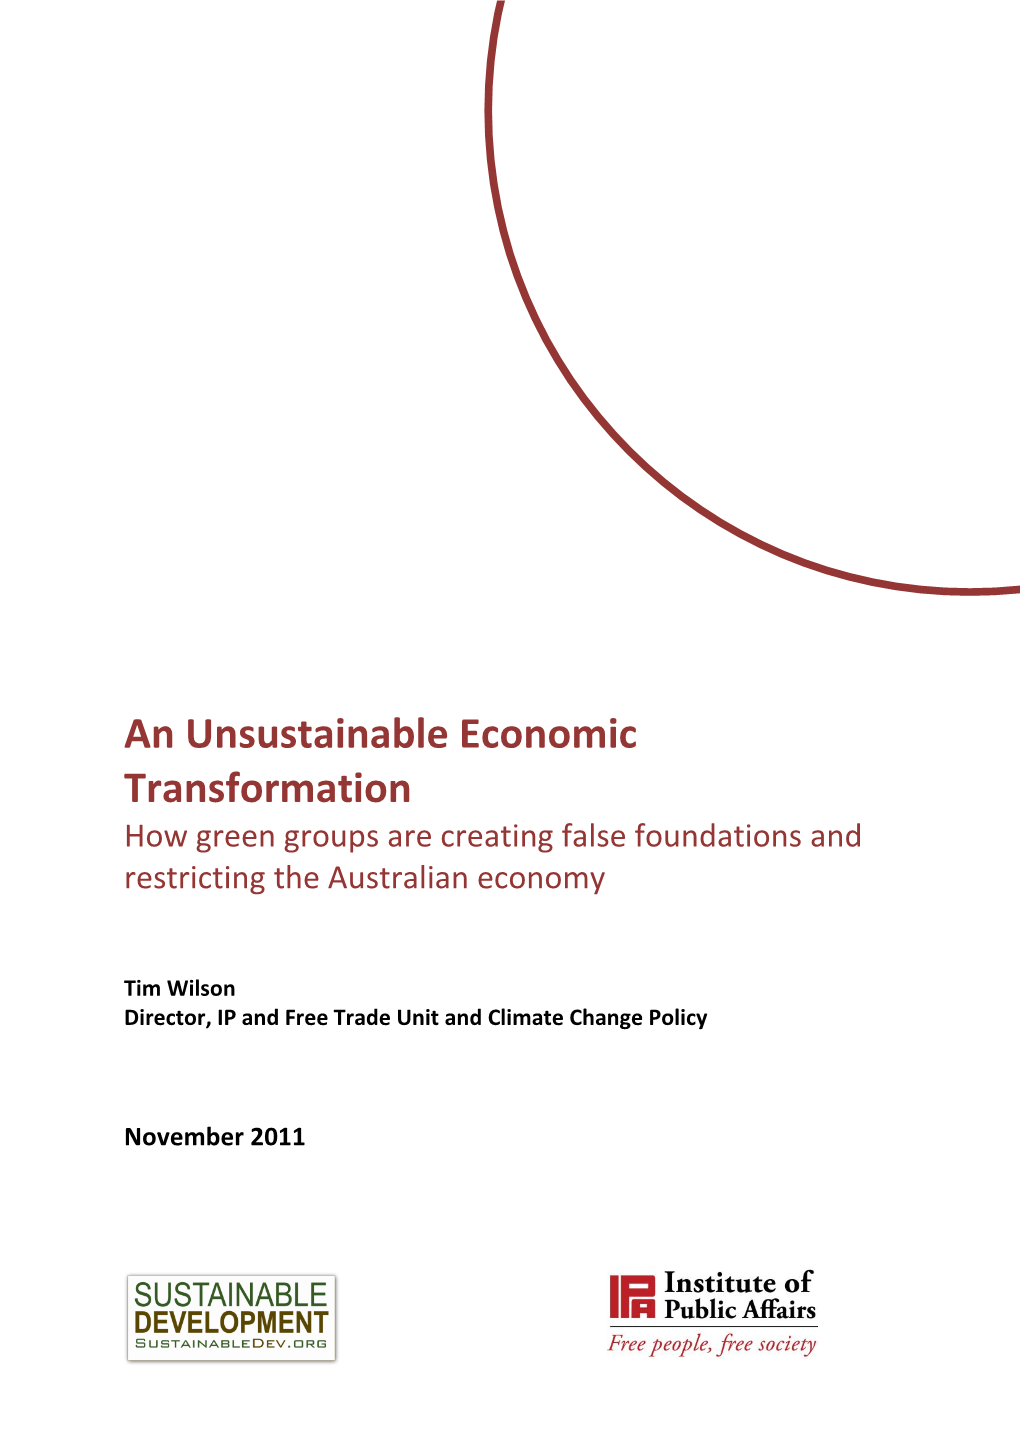 An Unsustainable Economic Transformation How Green Groups Are Creating False Foundations and Restricting the Australian Economy